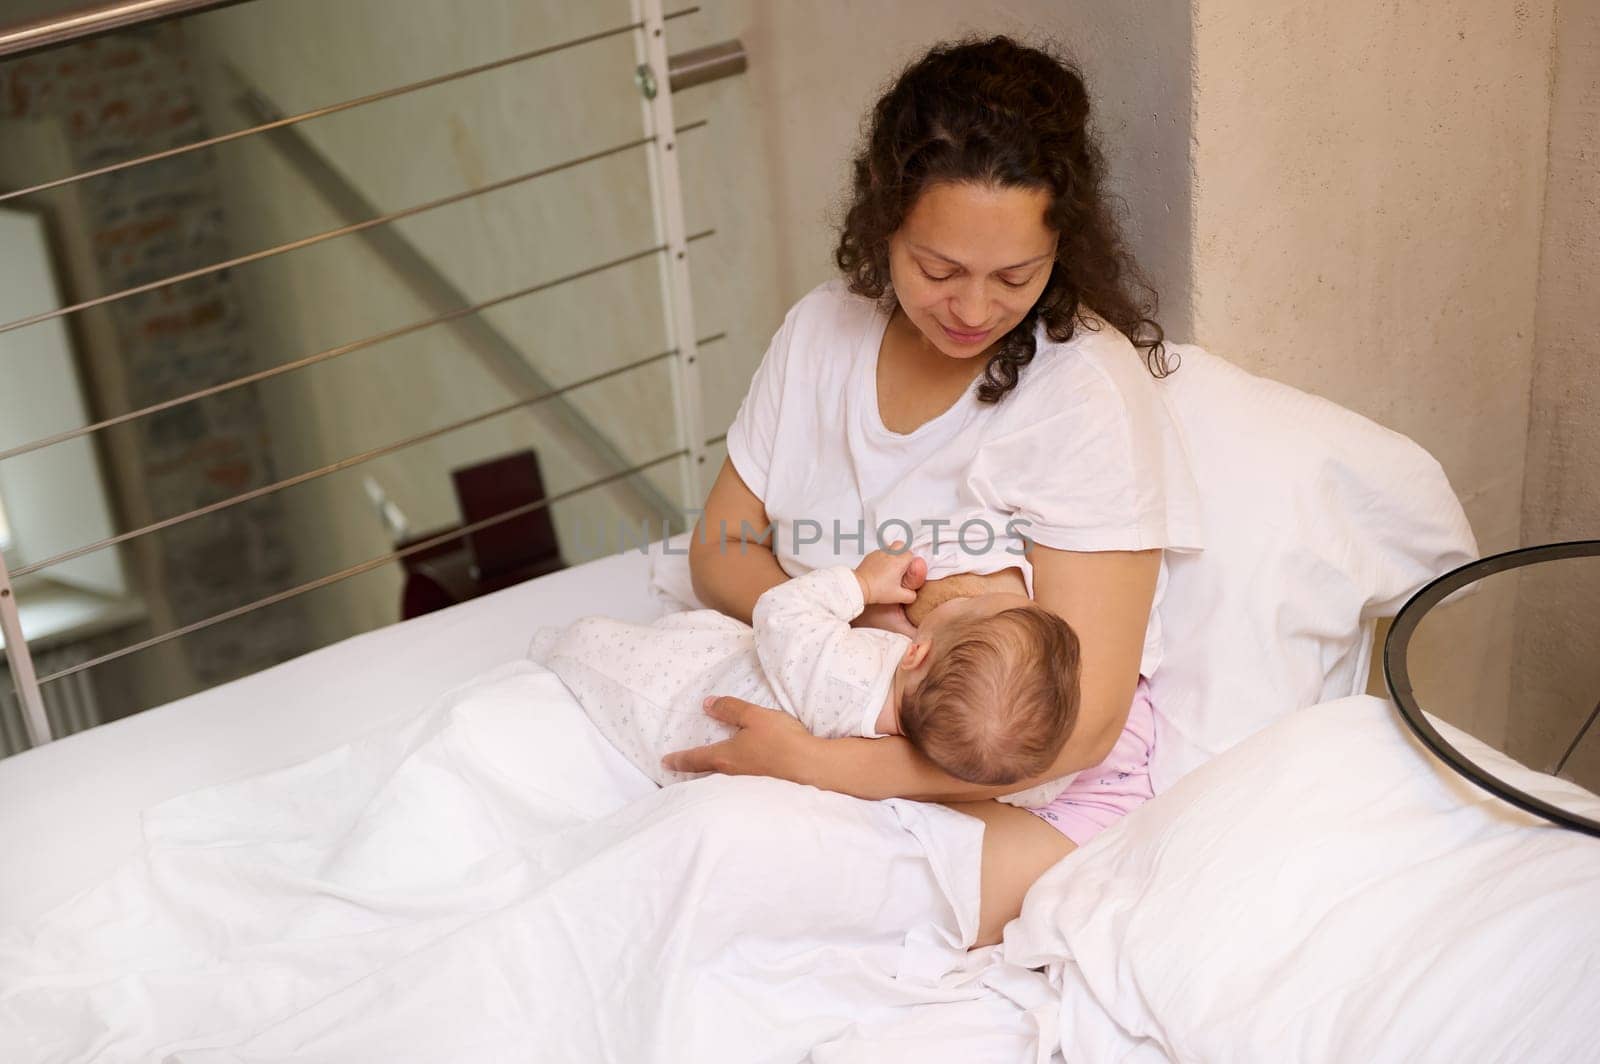 Confident young woman mother enjoys her maternity leave lifestyle, breastfeeds her baby while wakes up in the morning by artgf